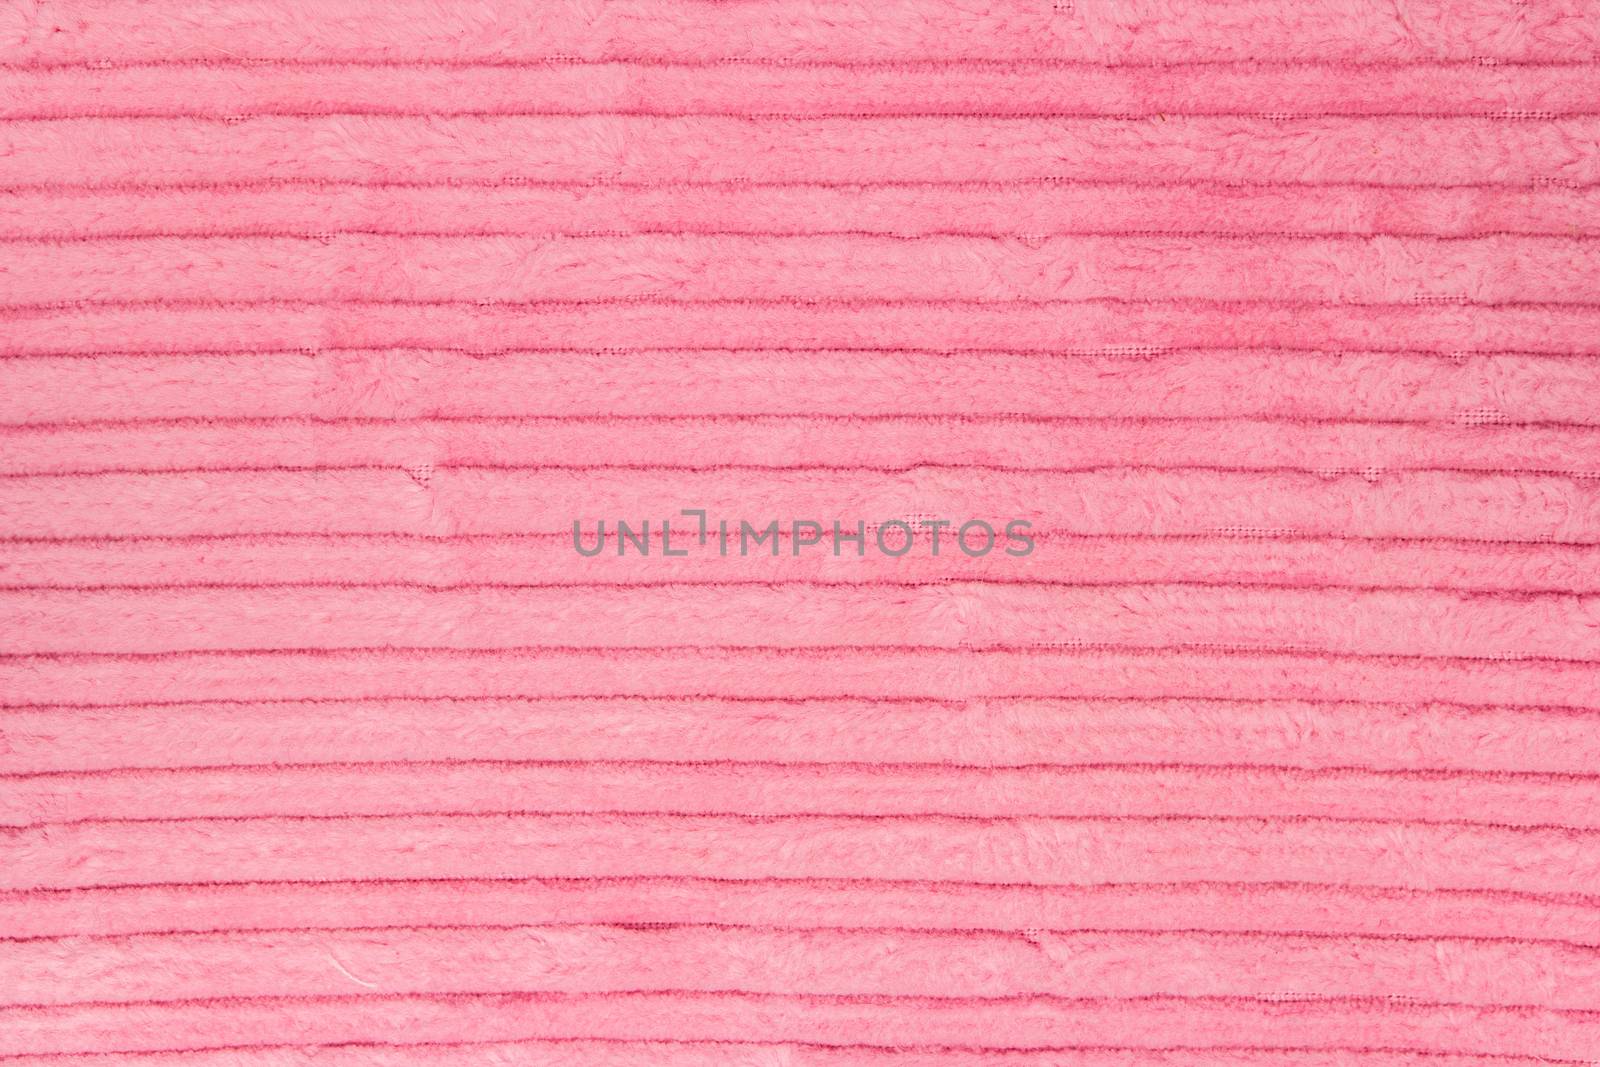 Ribbed pink corduroy texture. Useful for background